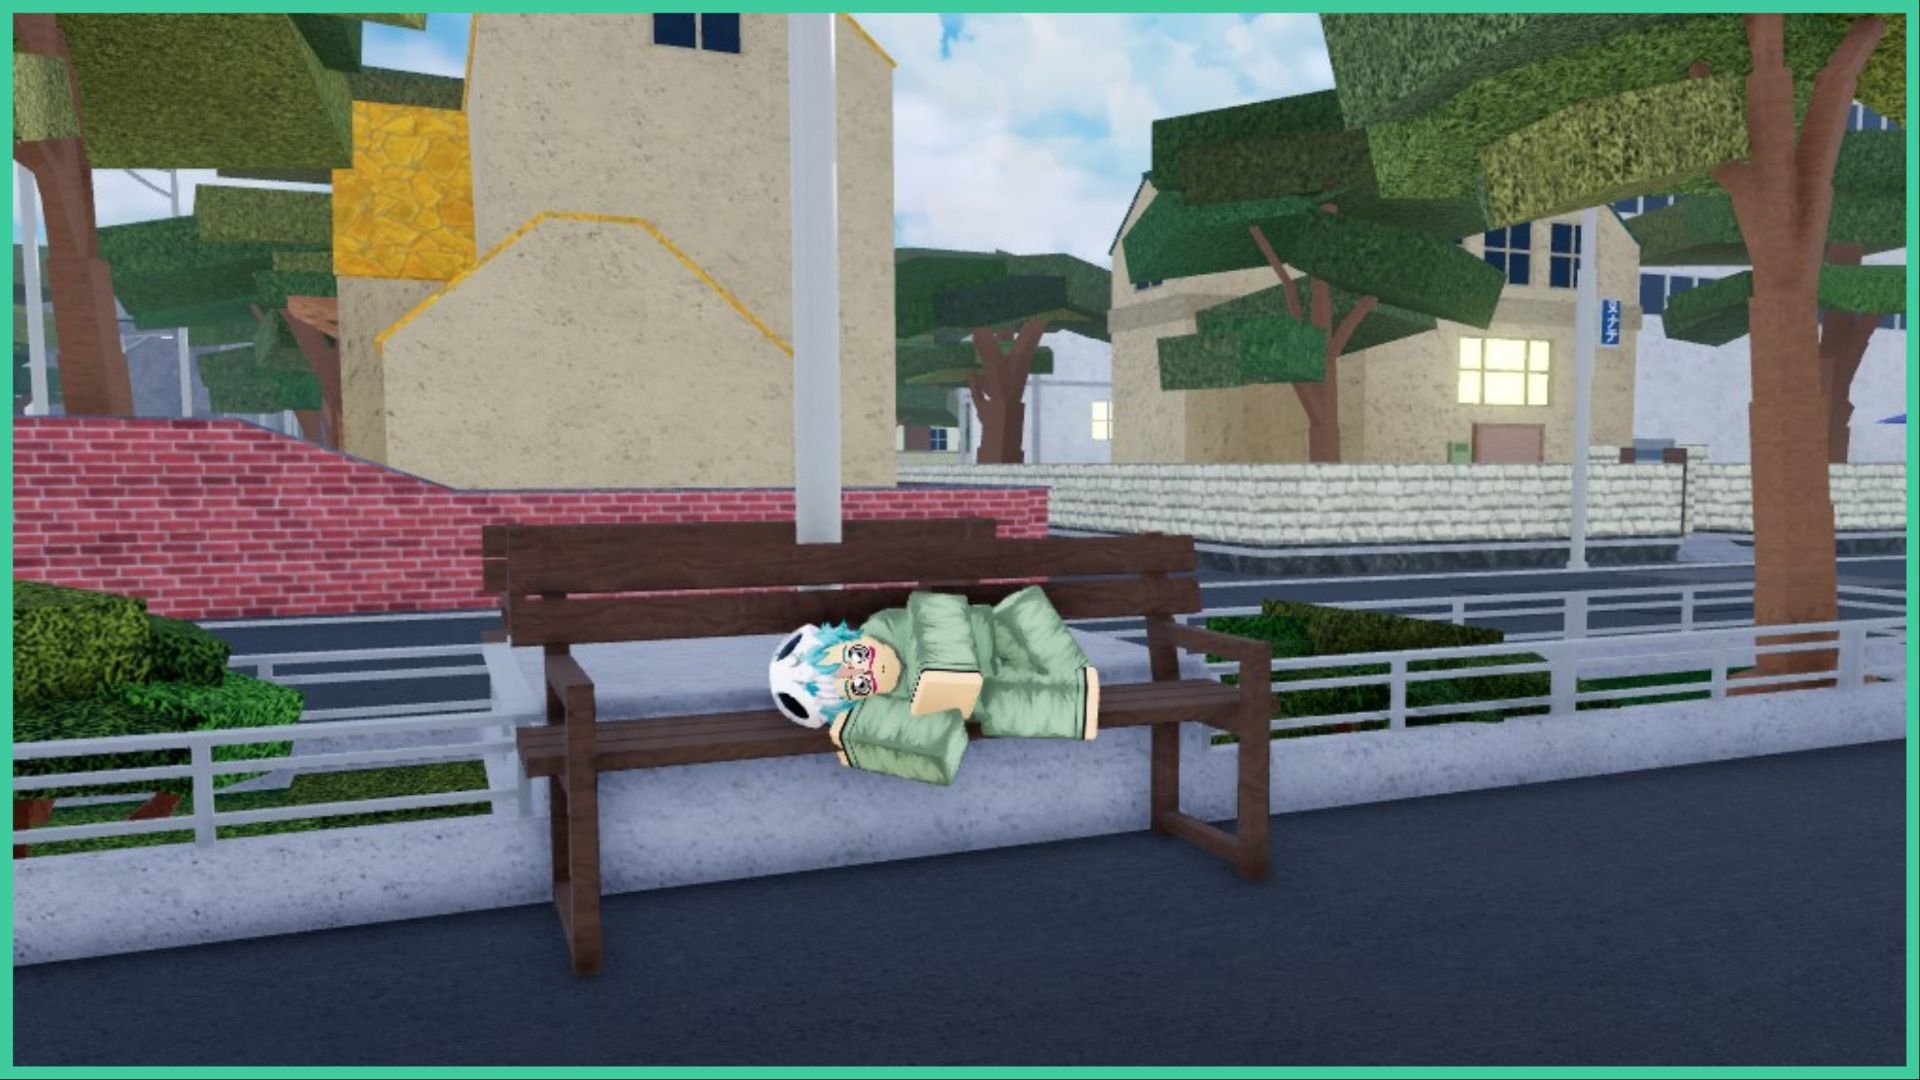 feature image for our type soul bank guide, the screenshot is of an NPC called Nel who is laying down on a wooden bench in the middle of a street in karakura town, there are residential houses behind them, as well as a brick wall that fences off the homes